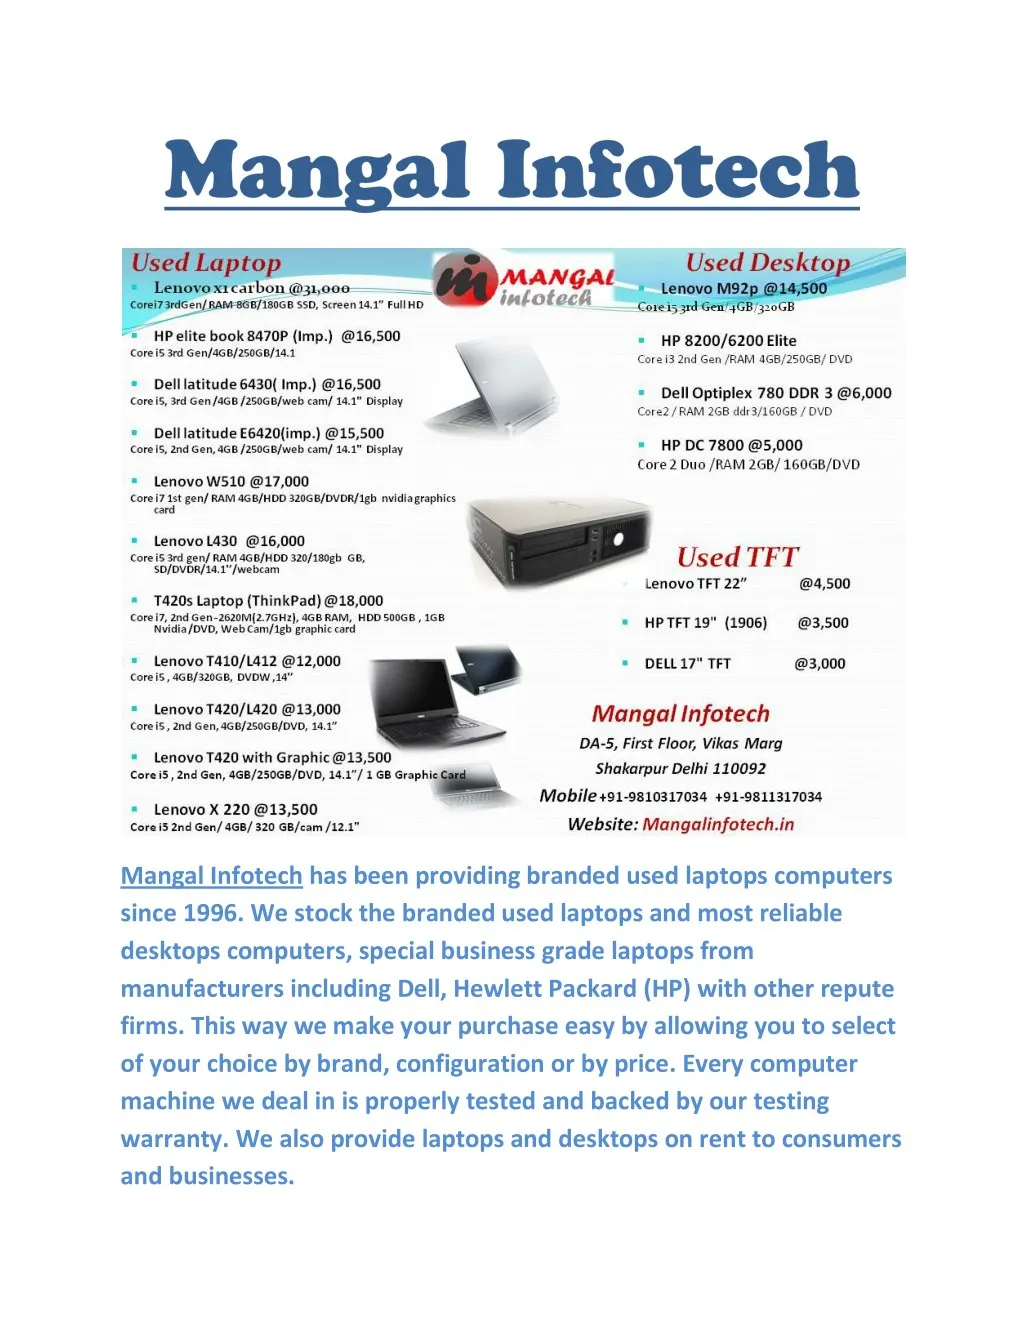 mangal infotech has been providing branded used